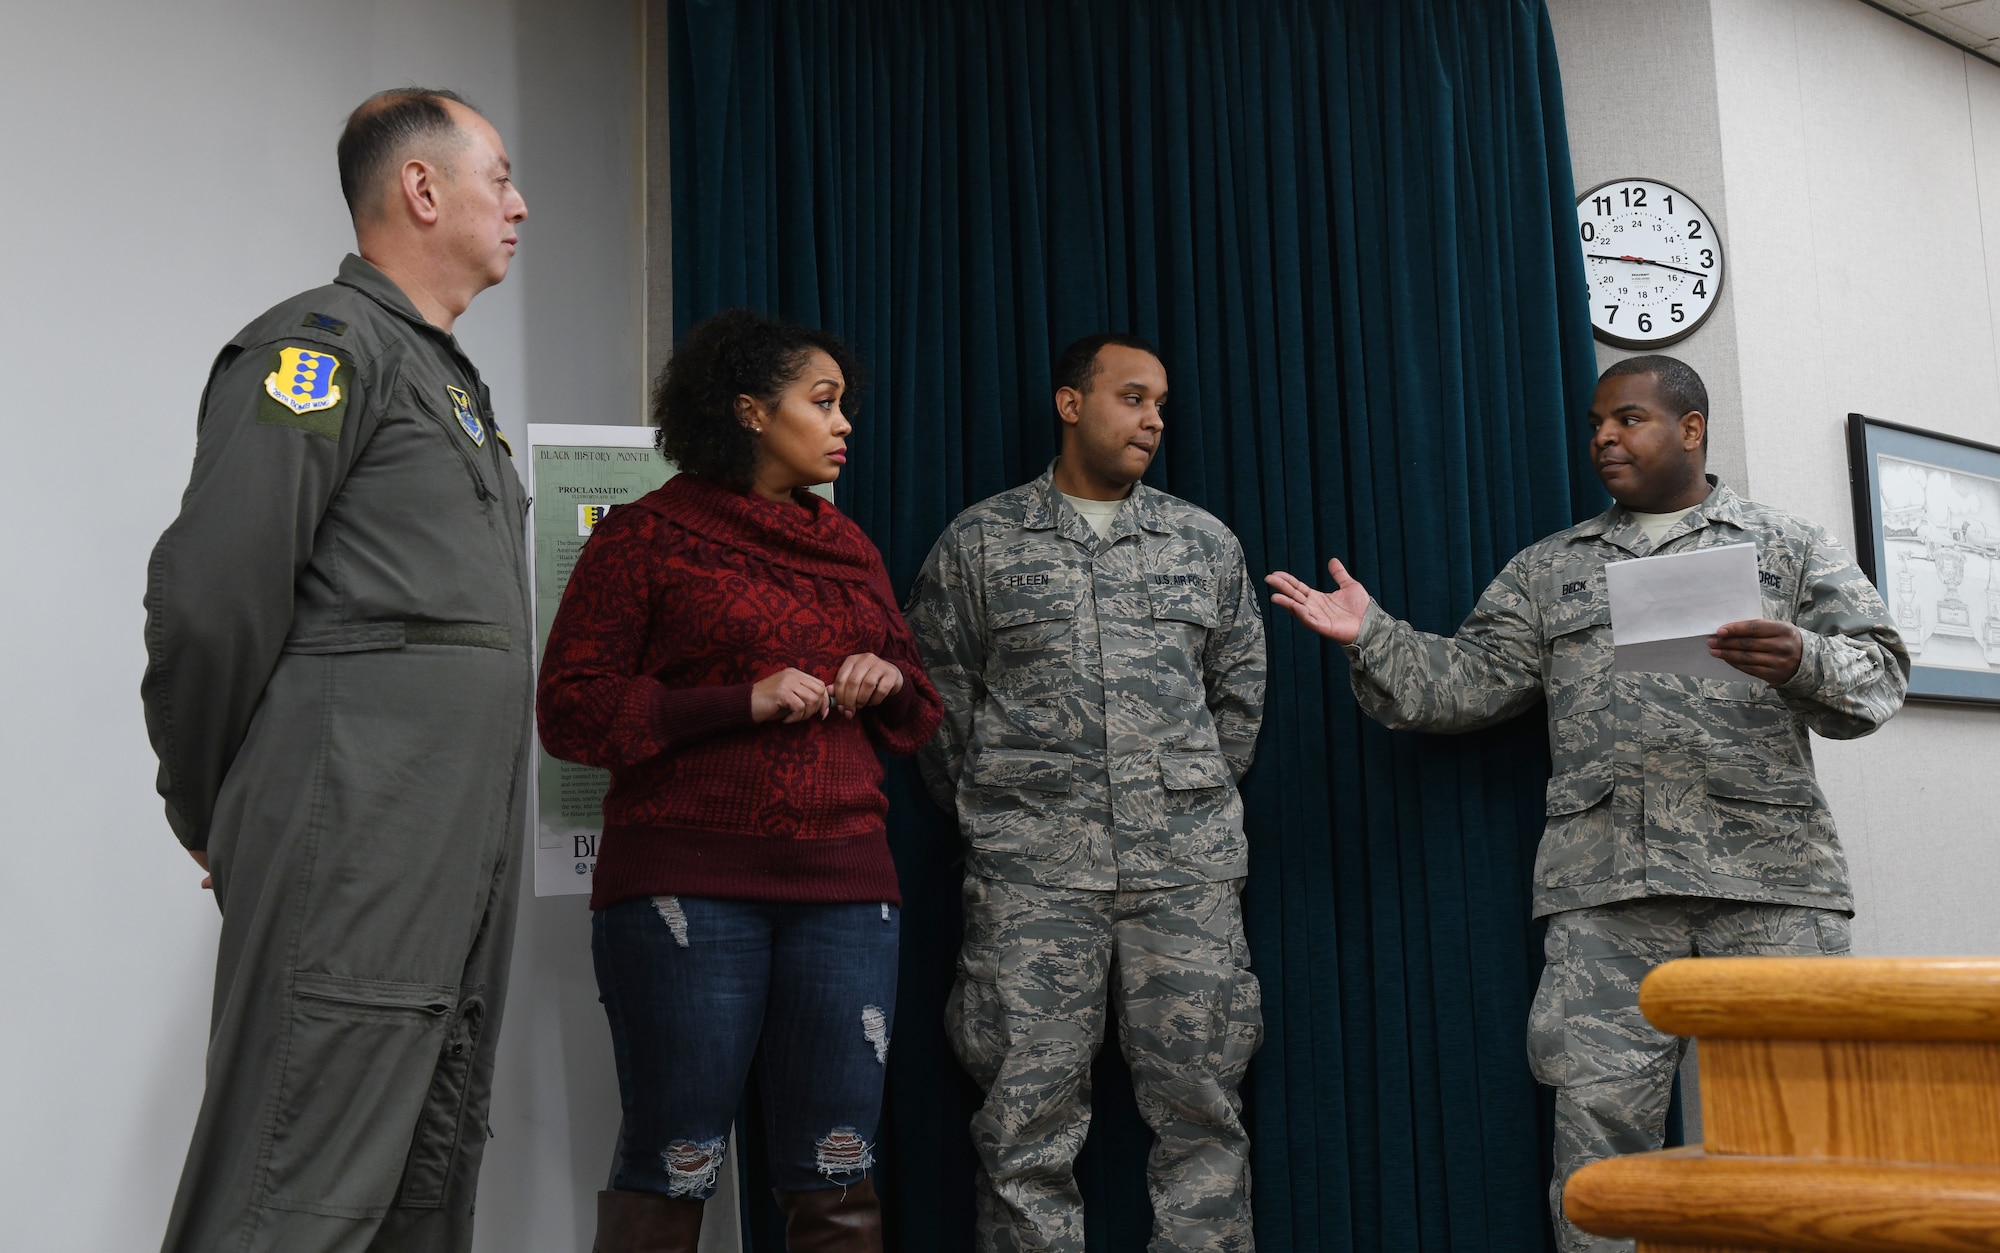 Tech. Sgt. James Beck, the 34th Bomb Squadron aviation resource management noncommissioned officer in charge, speaks about base events being held in recognition of African American History Month at Ellsworth Air Force Base, S.D., Feb. 14, 2019. The African American Heritage Committee assembled a proclamation to be signed by Col. John Edwards, the 28th Bomb Wing commander. (U.S. Air Force photo by Airman 1st Class Christina Bennett)